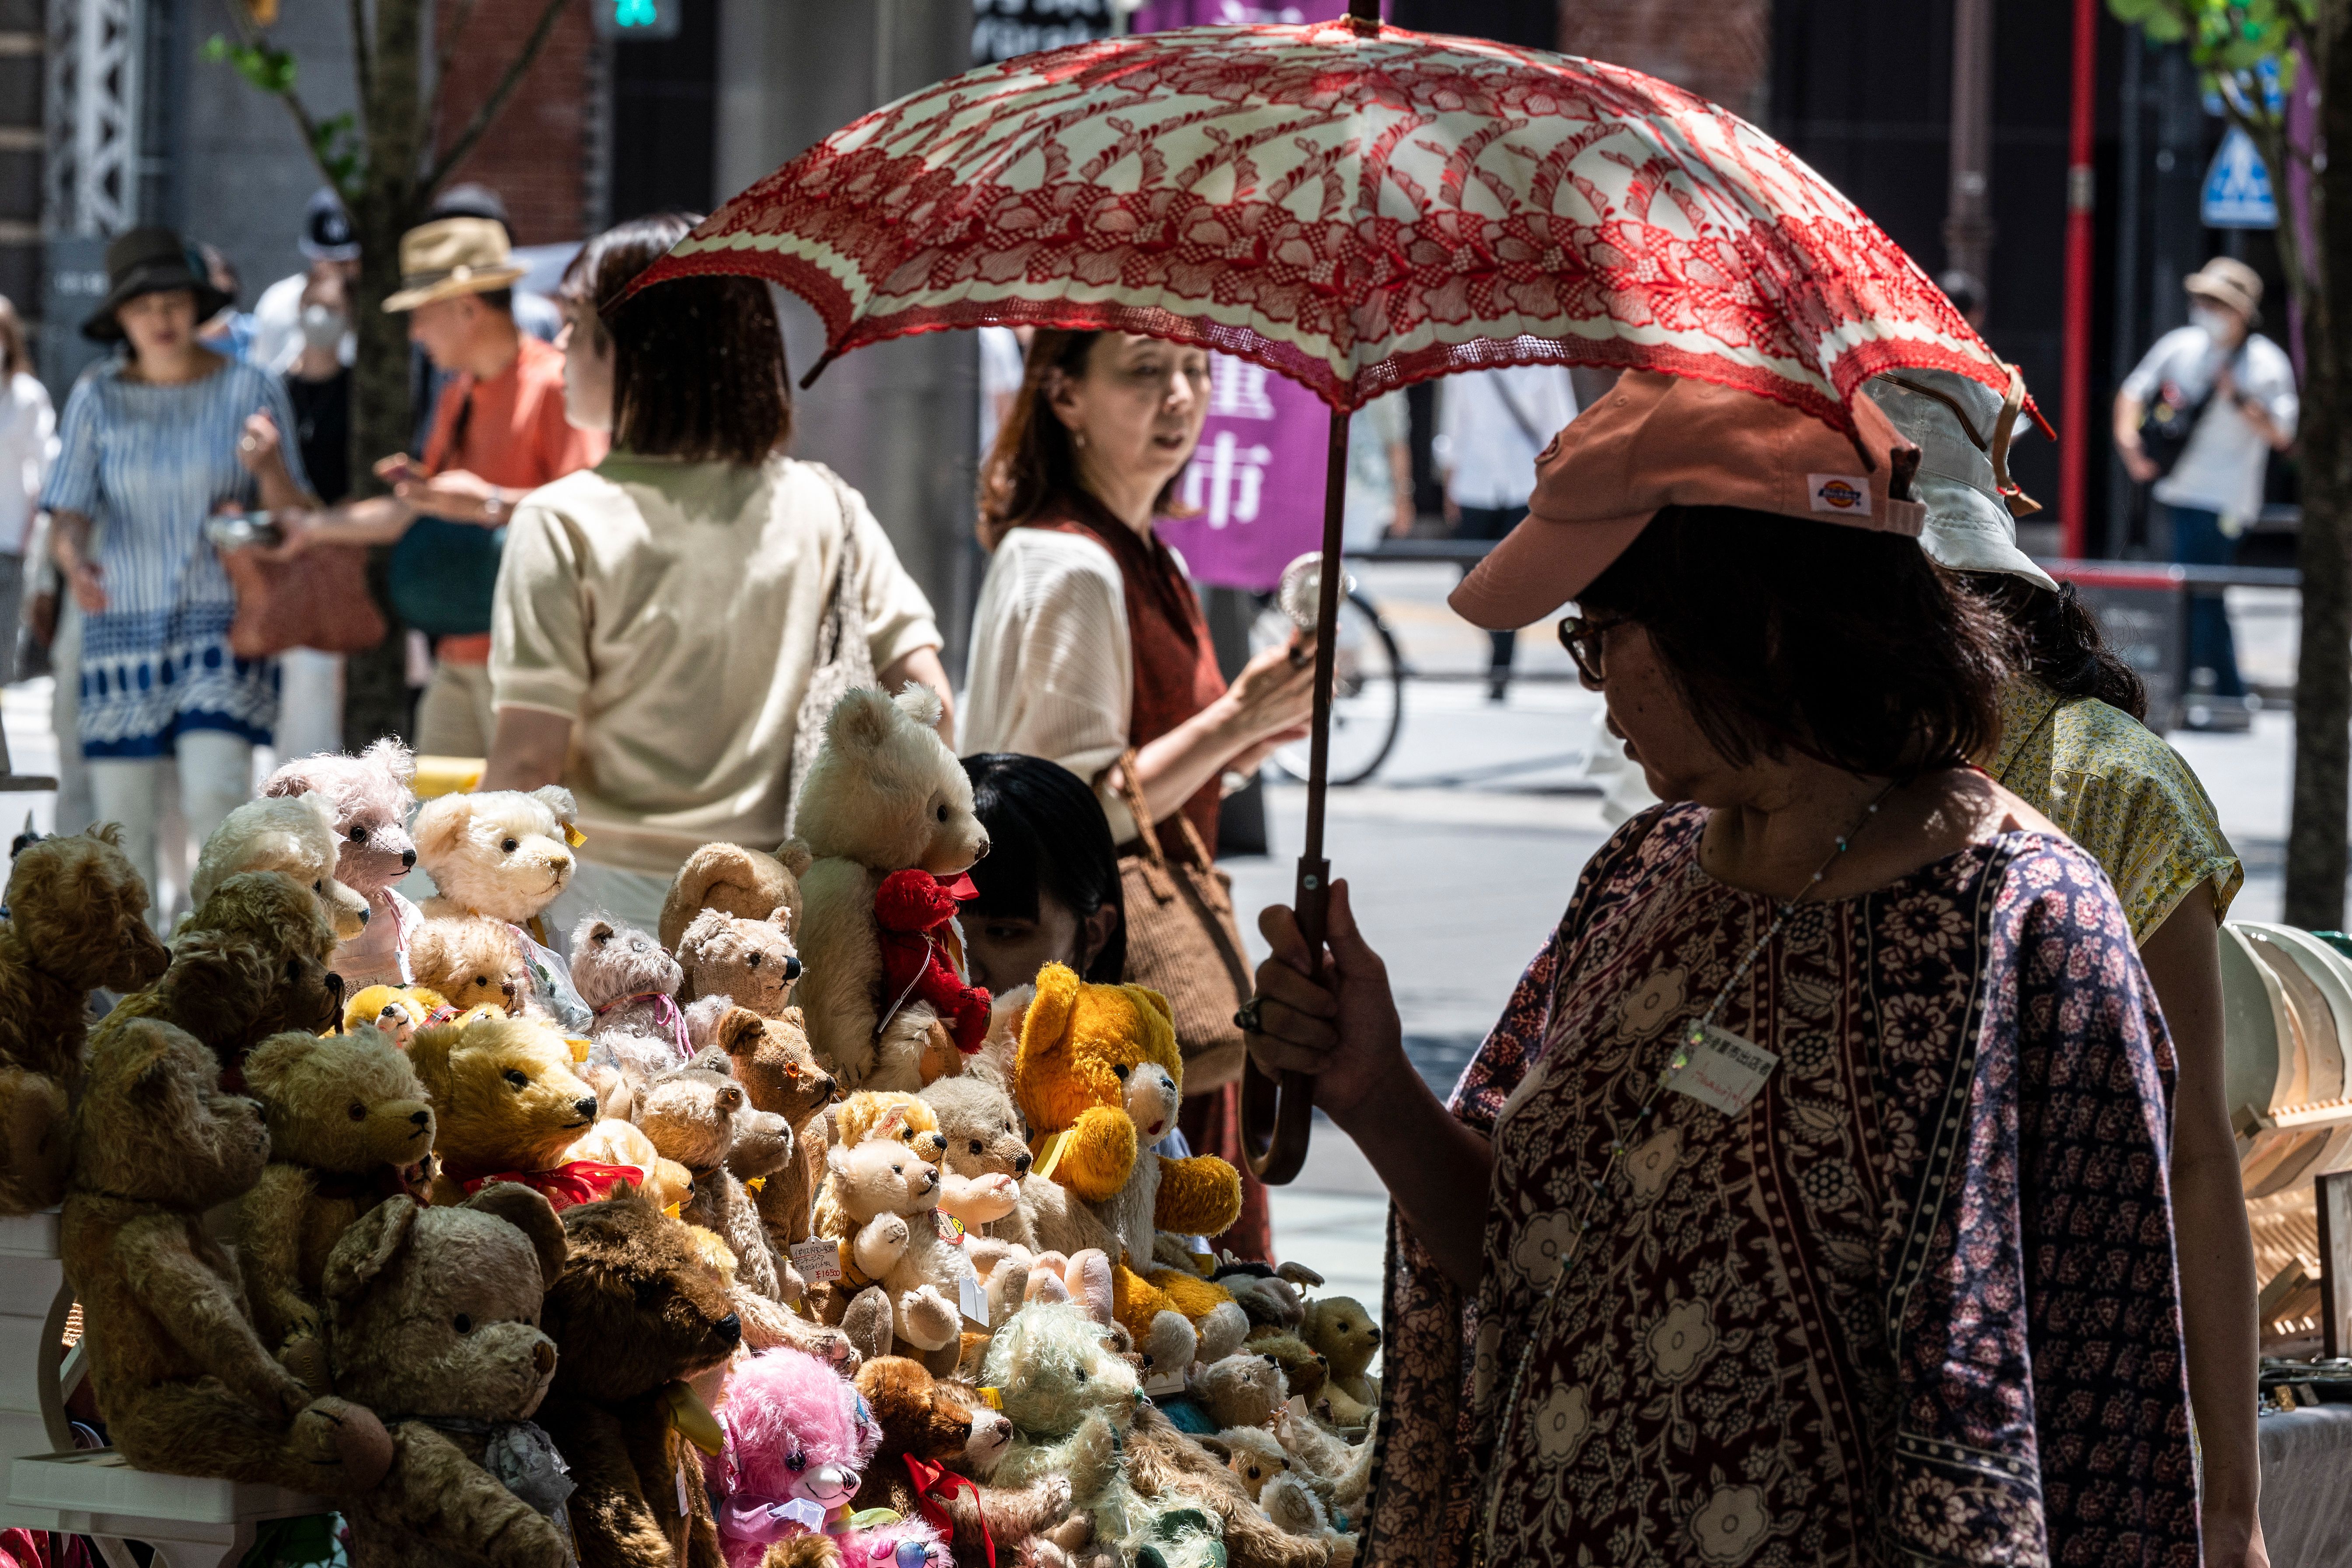 A woman (R) uses an umbrella to shelter from the midday sun as she looks Teddy Bears for sale at an outdoor antique market in downtown Tokyo on July 17, 2023. 